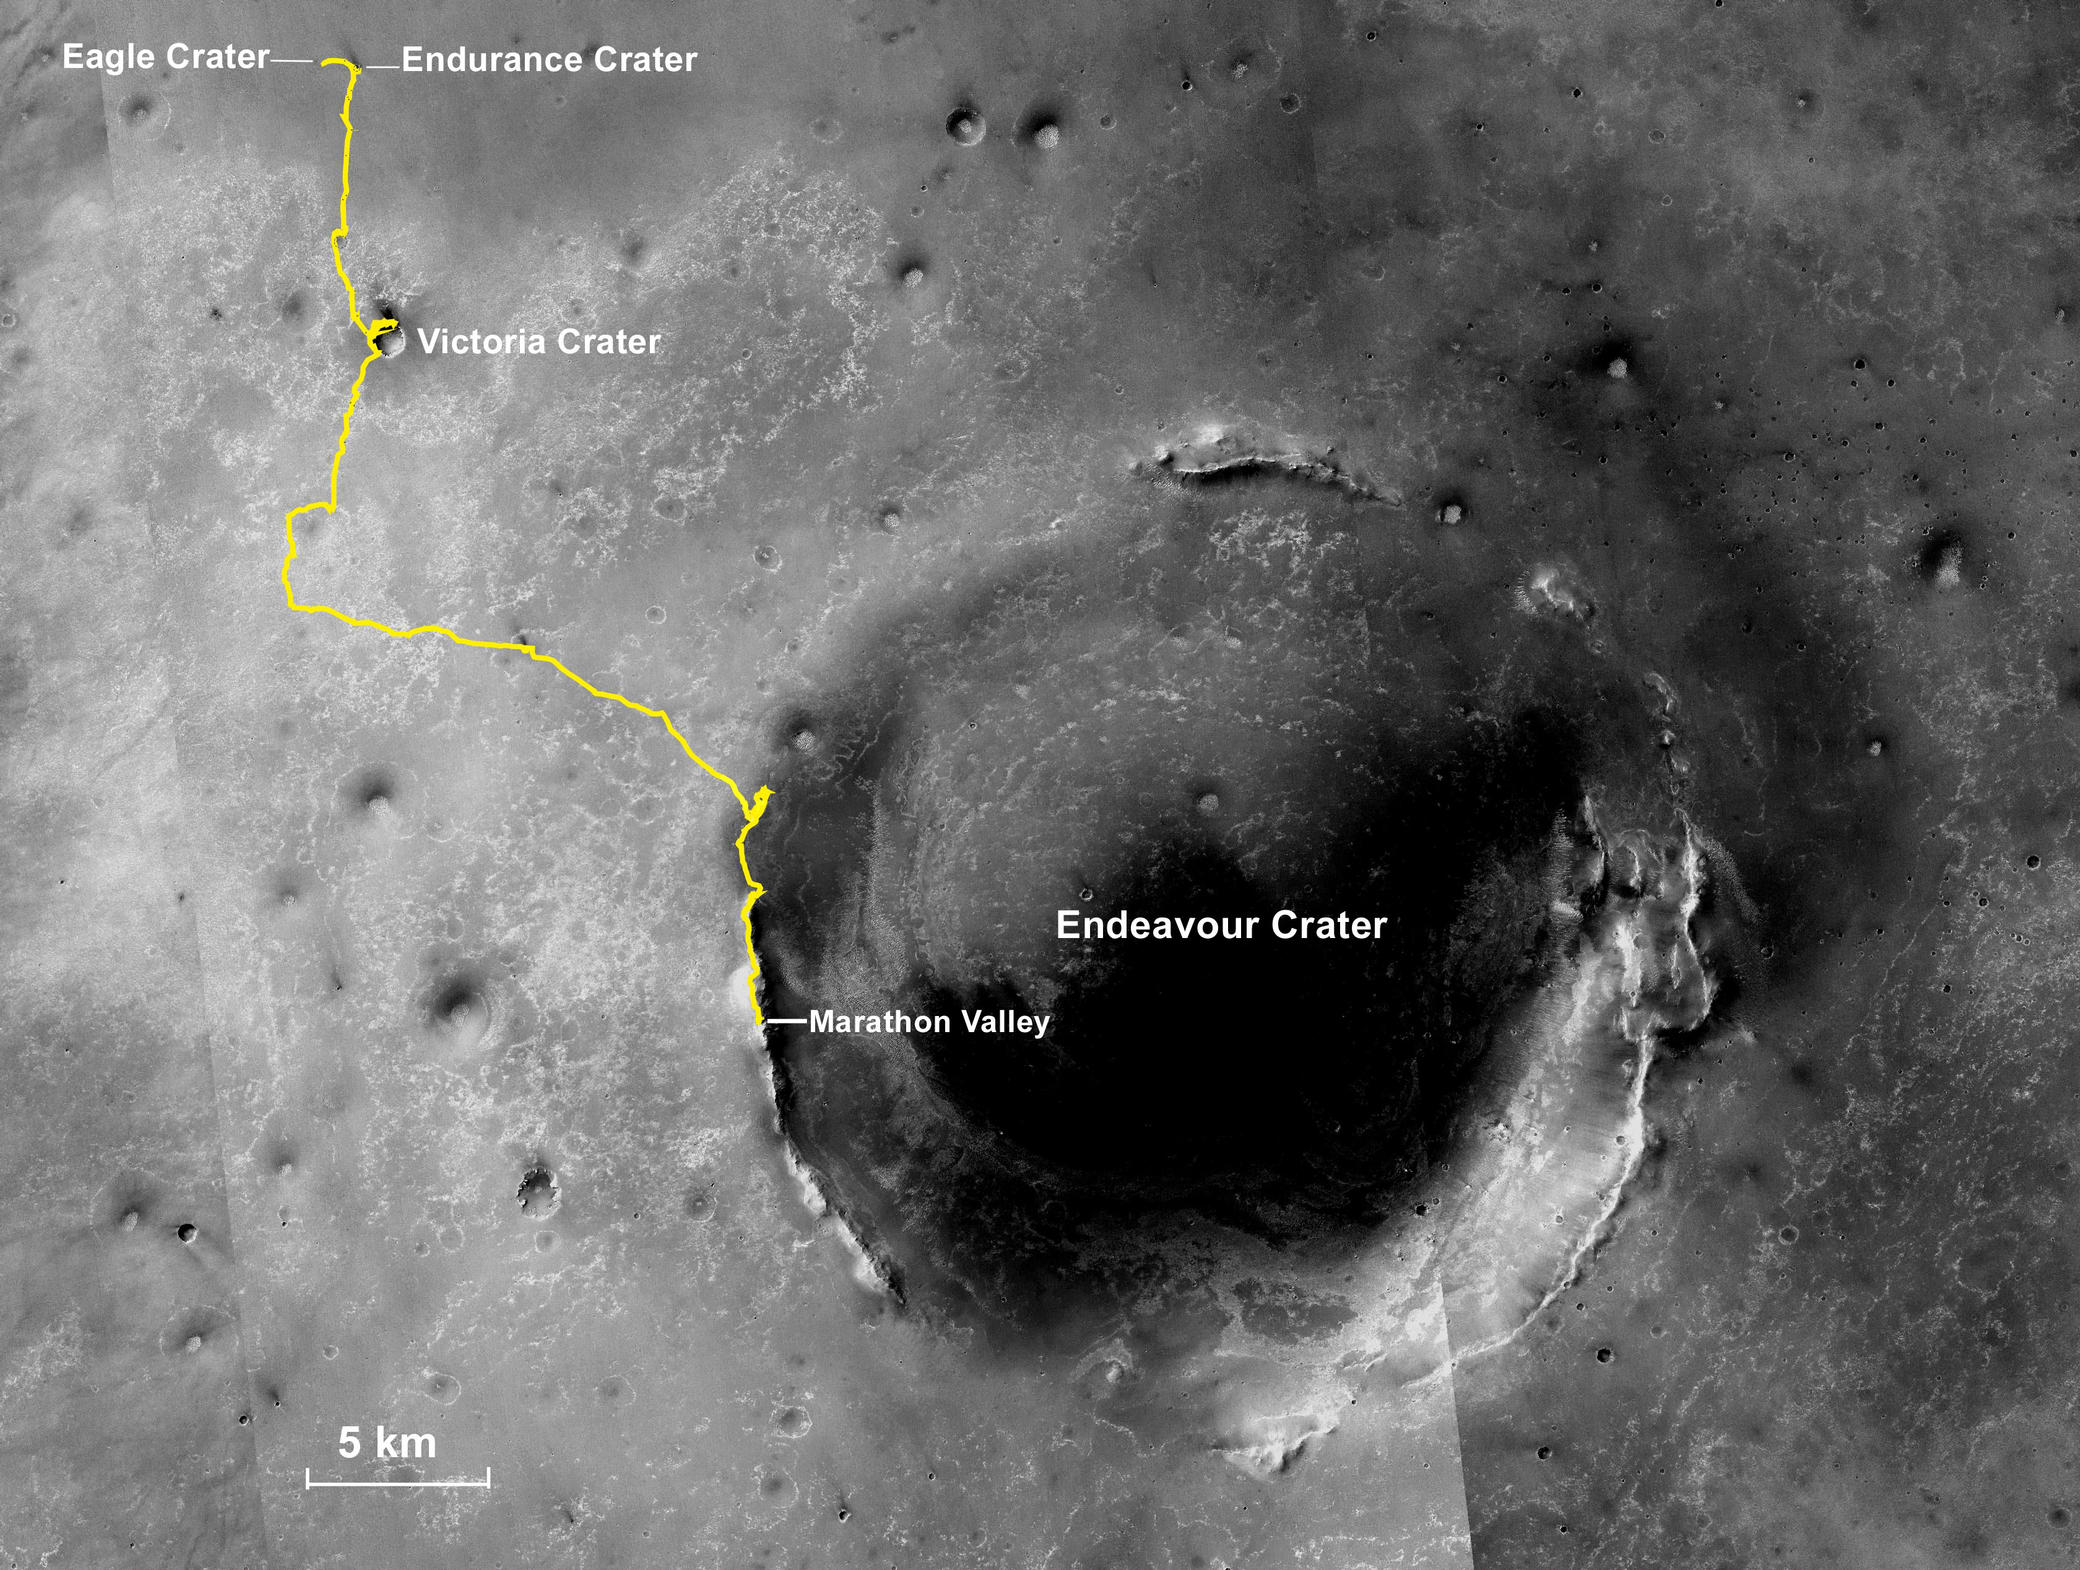 NASA's Opportunity Mars rover, working on Mars since January 2004, passed marathon distance in total driving on March 24, 2015. This map shows the rover's entire traverse from landing to that point.